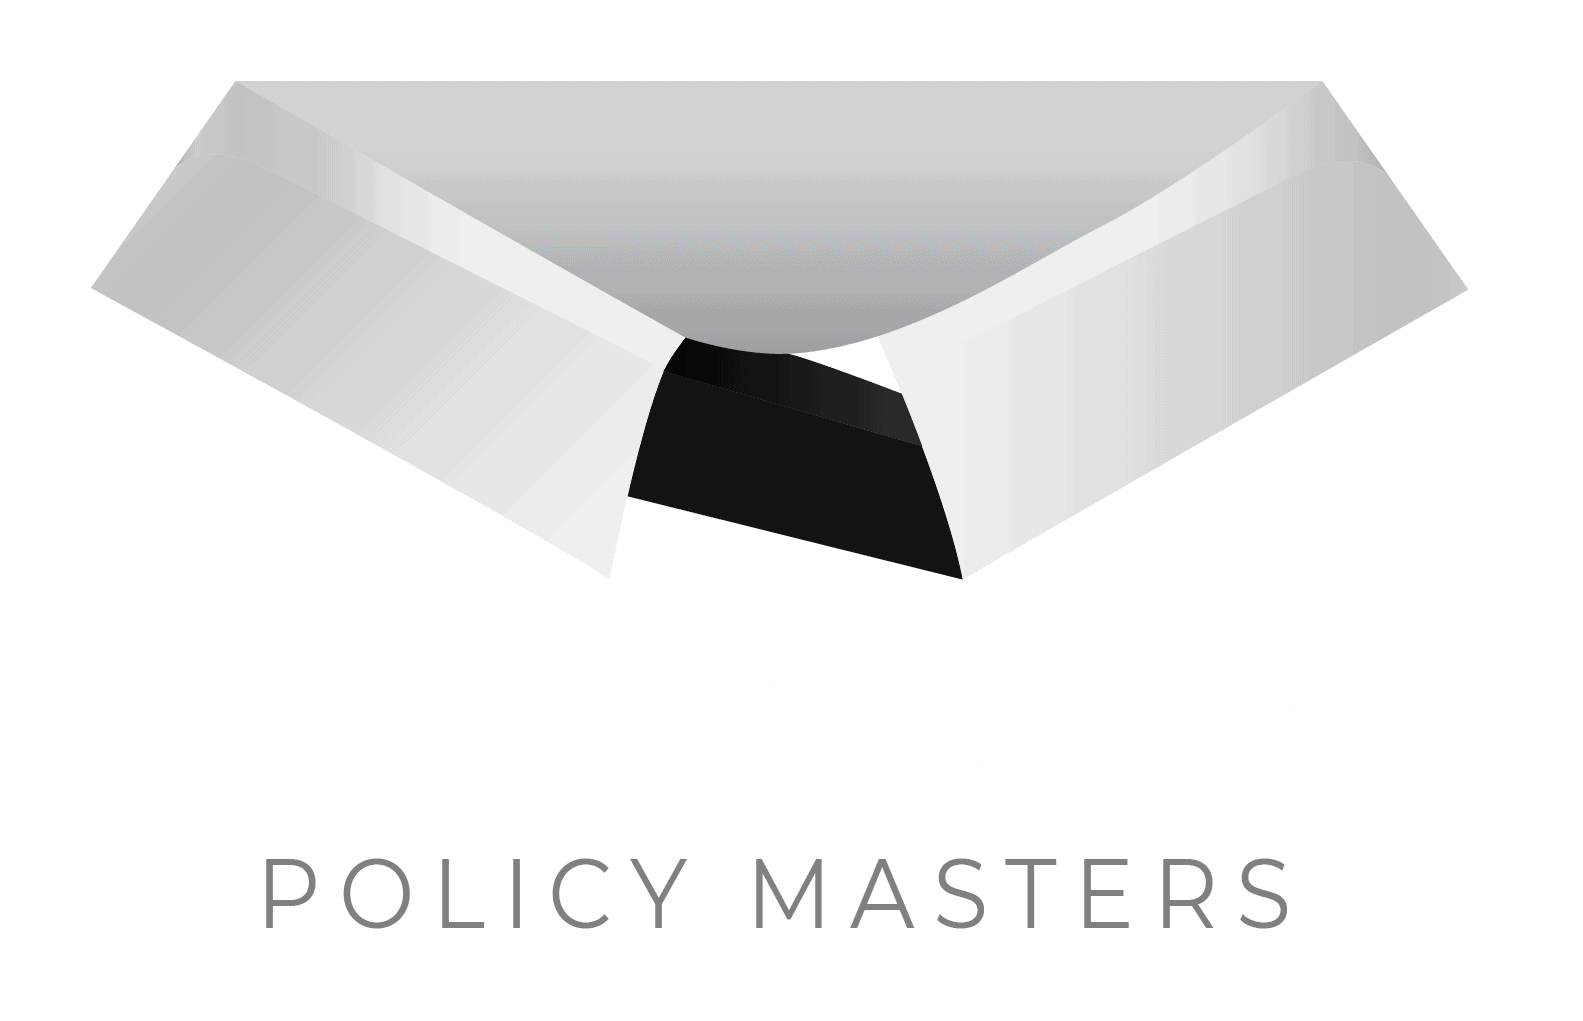 policy masters png-01